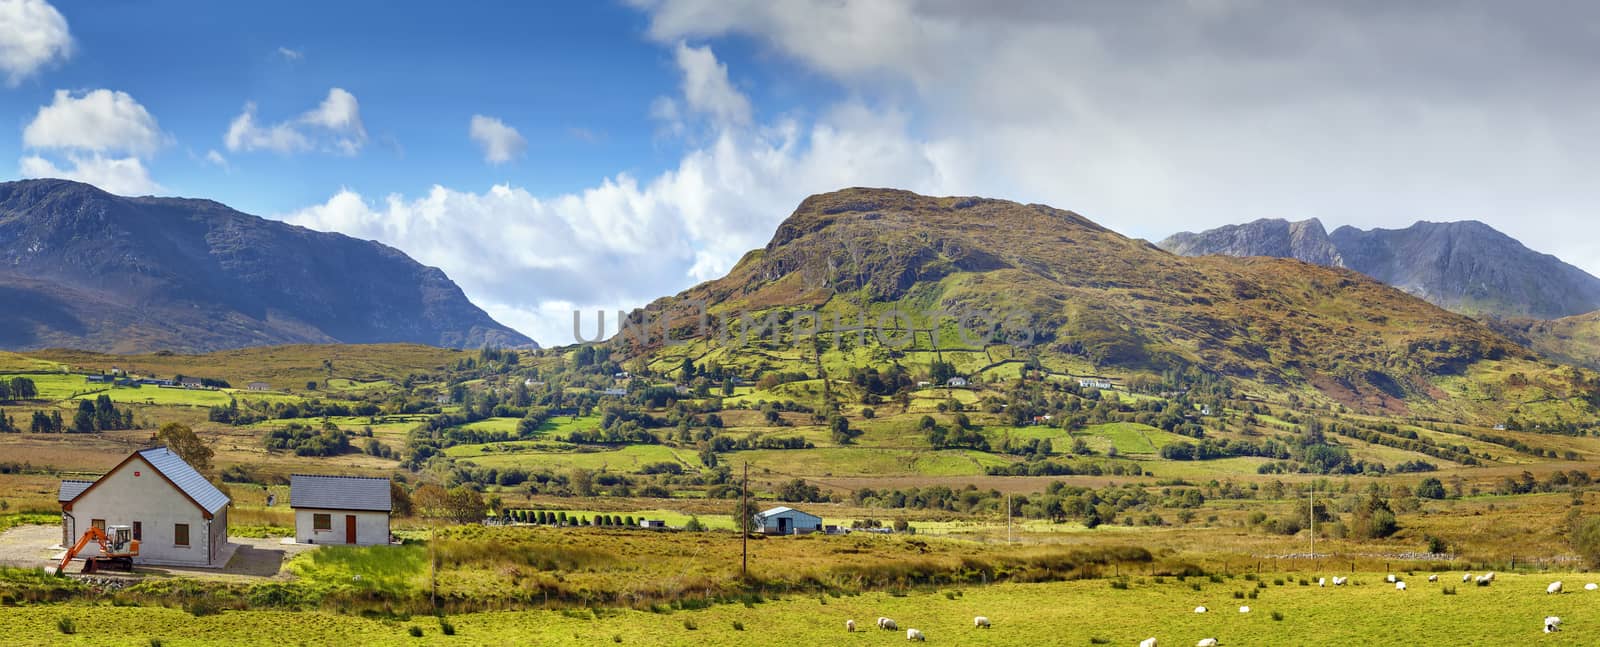 Landscape with mountains, Ireland by borisb17